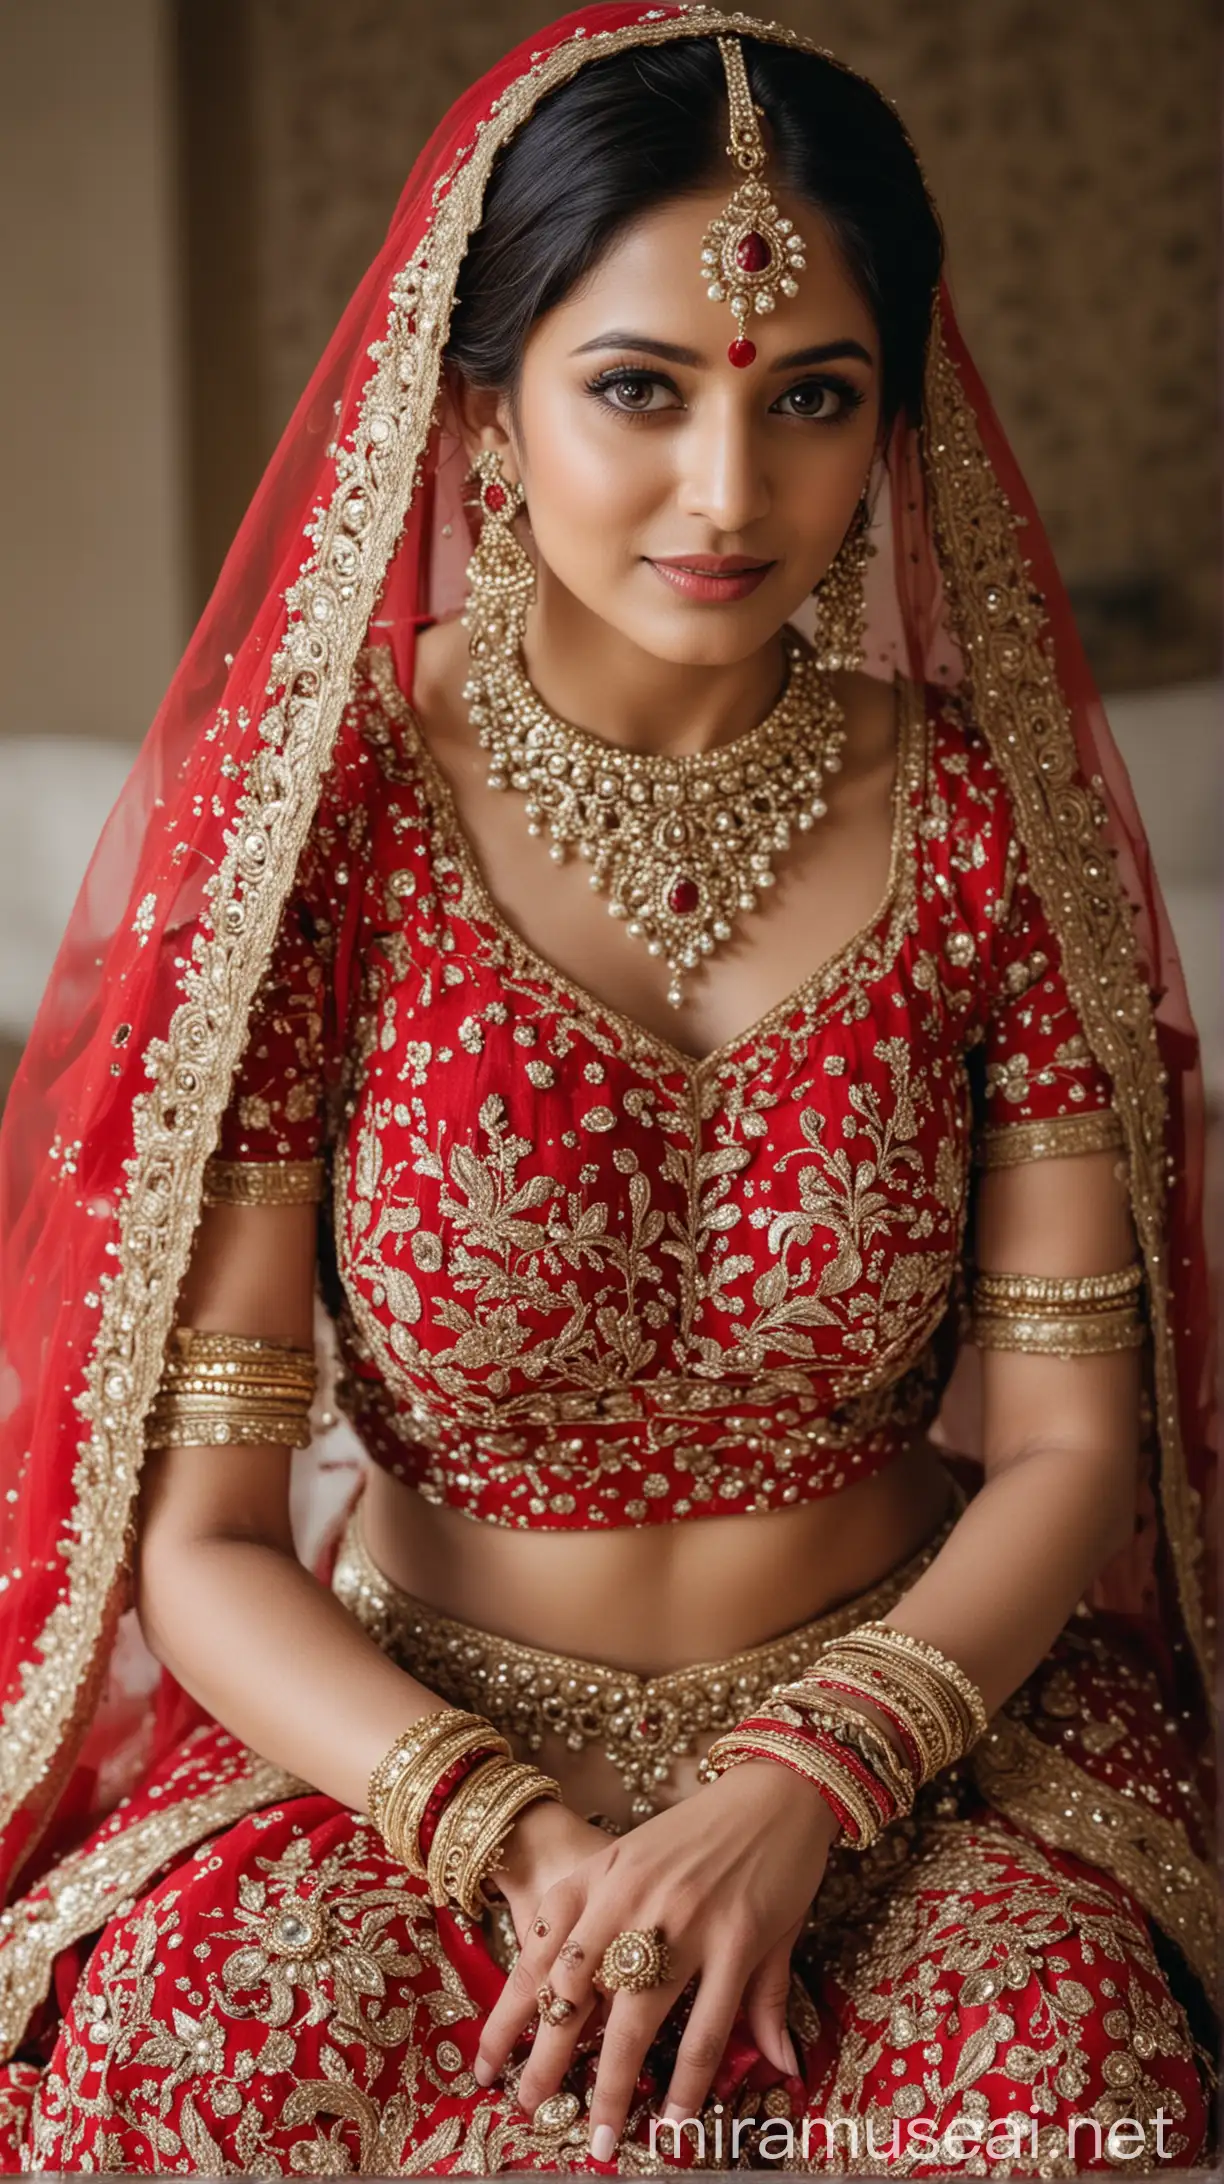 Traditional Indian Bride in Red Lehenga and Ornate Jewelry